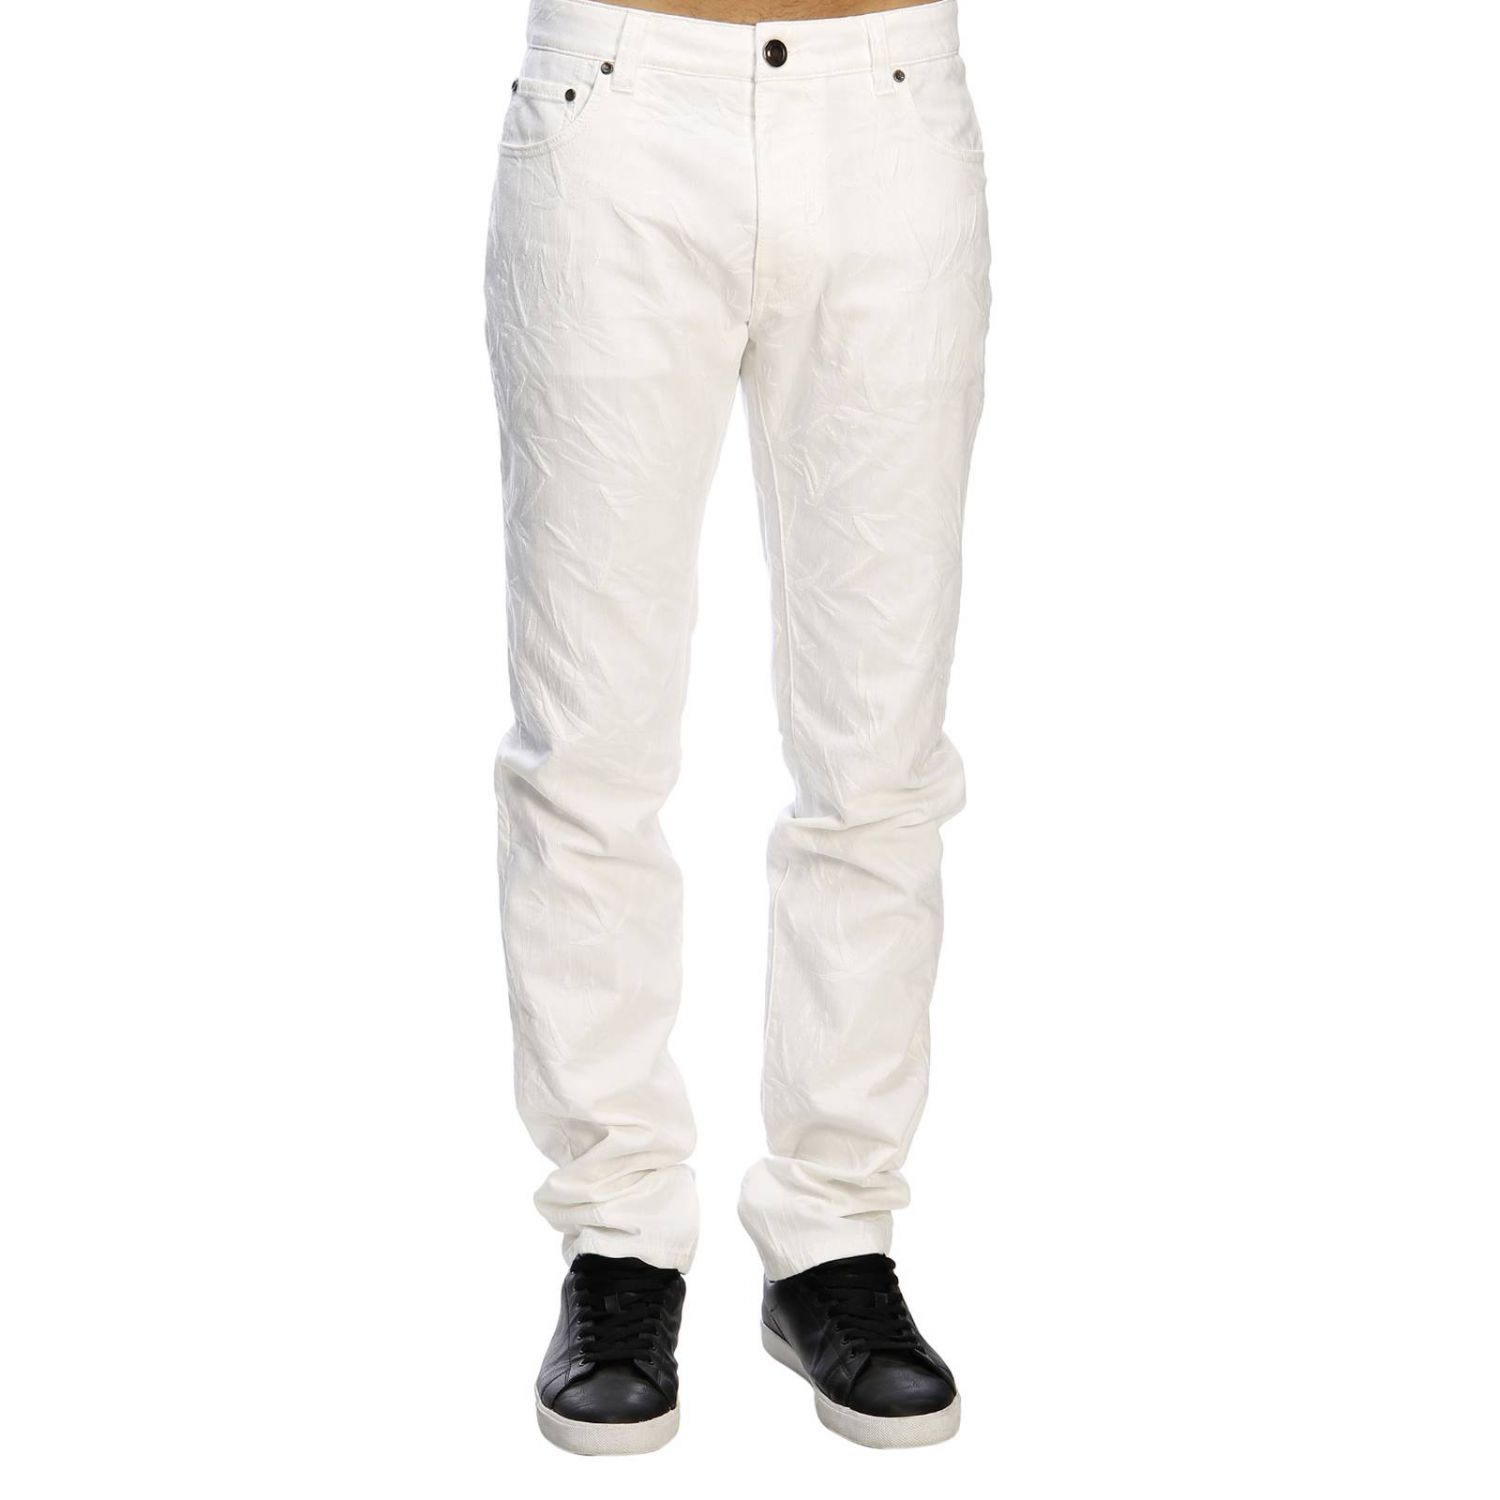 Etro Outlet: trousers for men - White | Etro trousers 1W508 1284 online ...